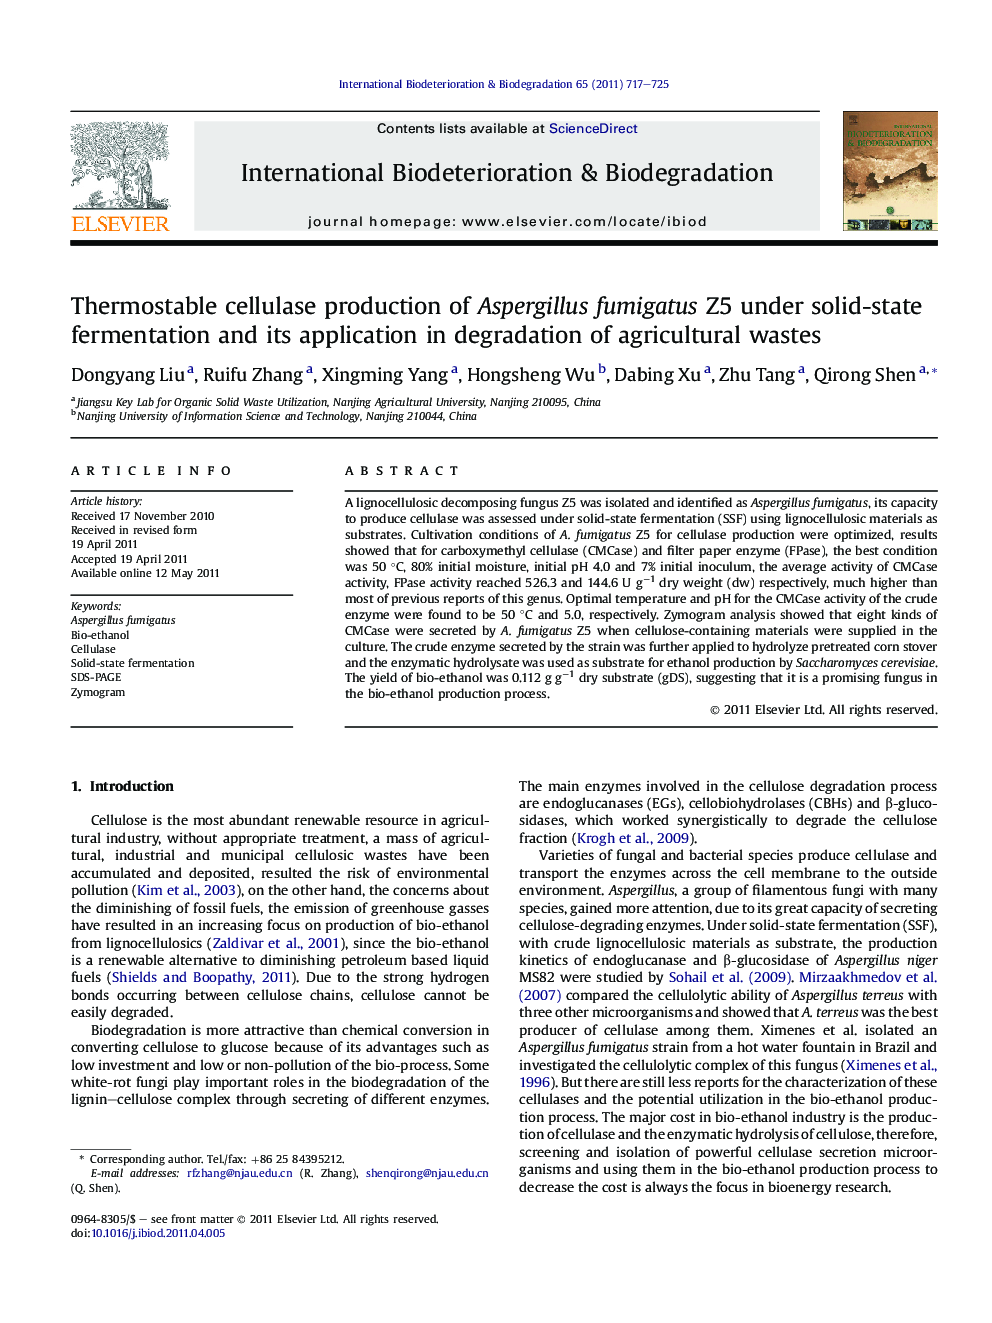 Thermostable cellulase production of Aspergillus fumigatus Z5 under solid-state fermentation and its application in degradation of agricultural wastes